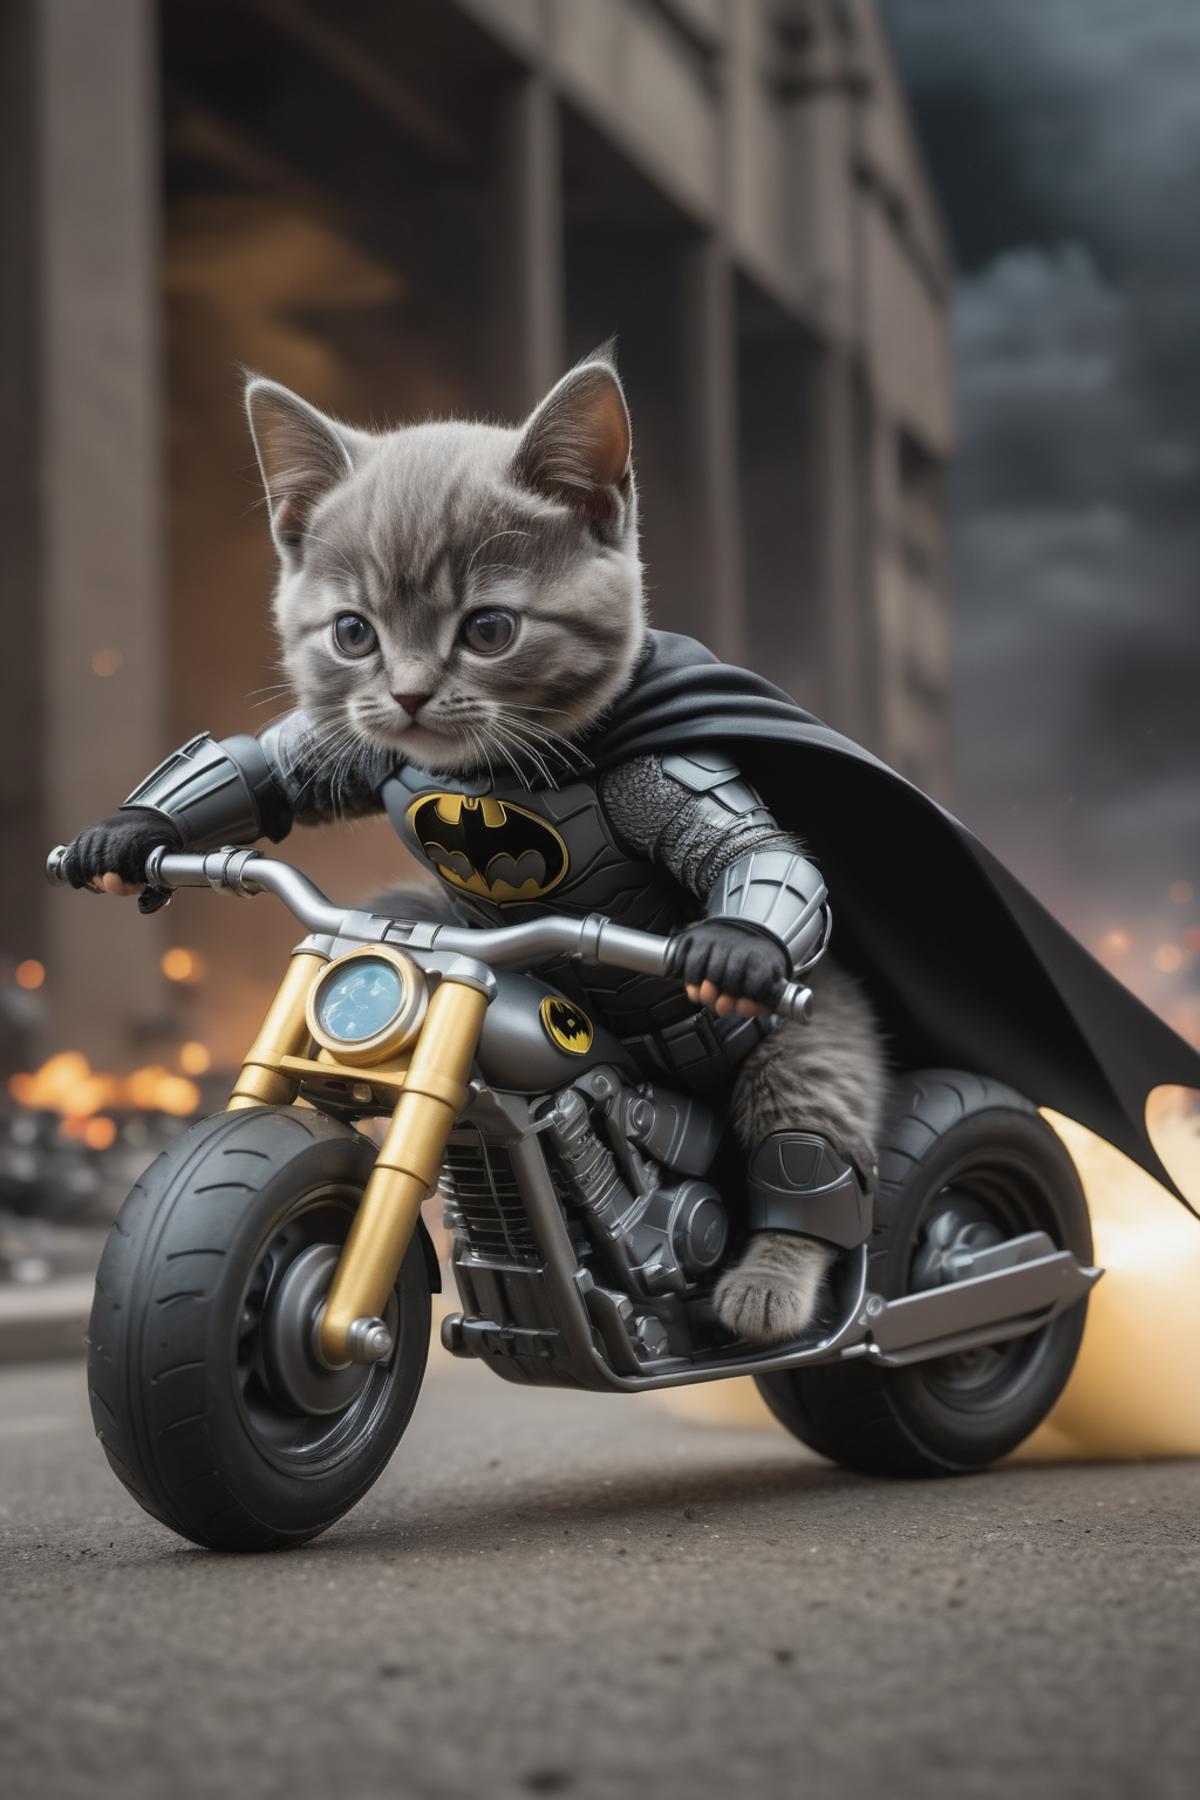 A small kitten riding a toy motorcycle in a Batman costume.